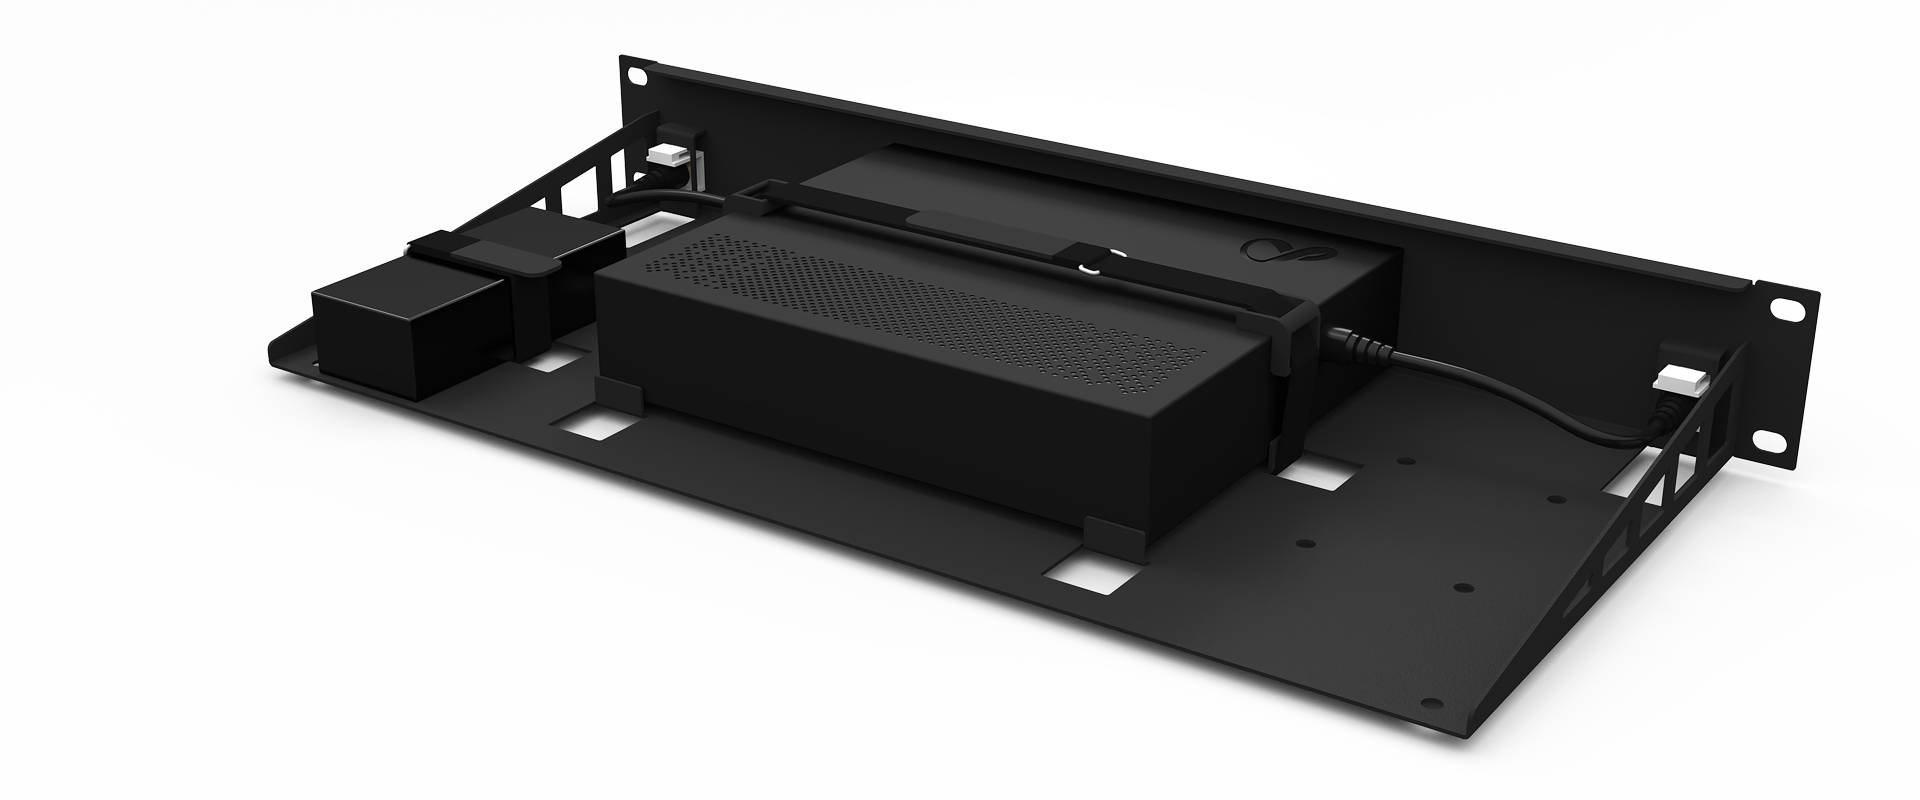 19 inch Rackmount for Check Point 1570 - NM-CHP-005